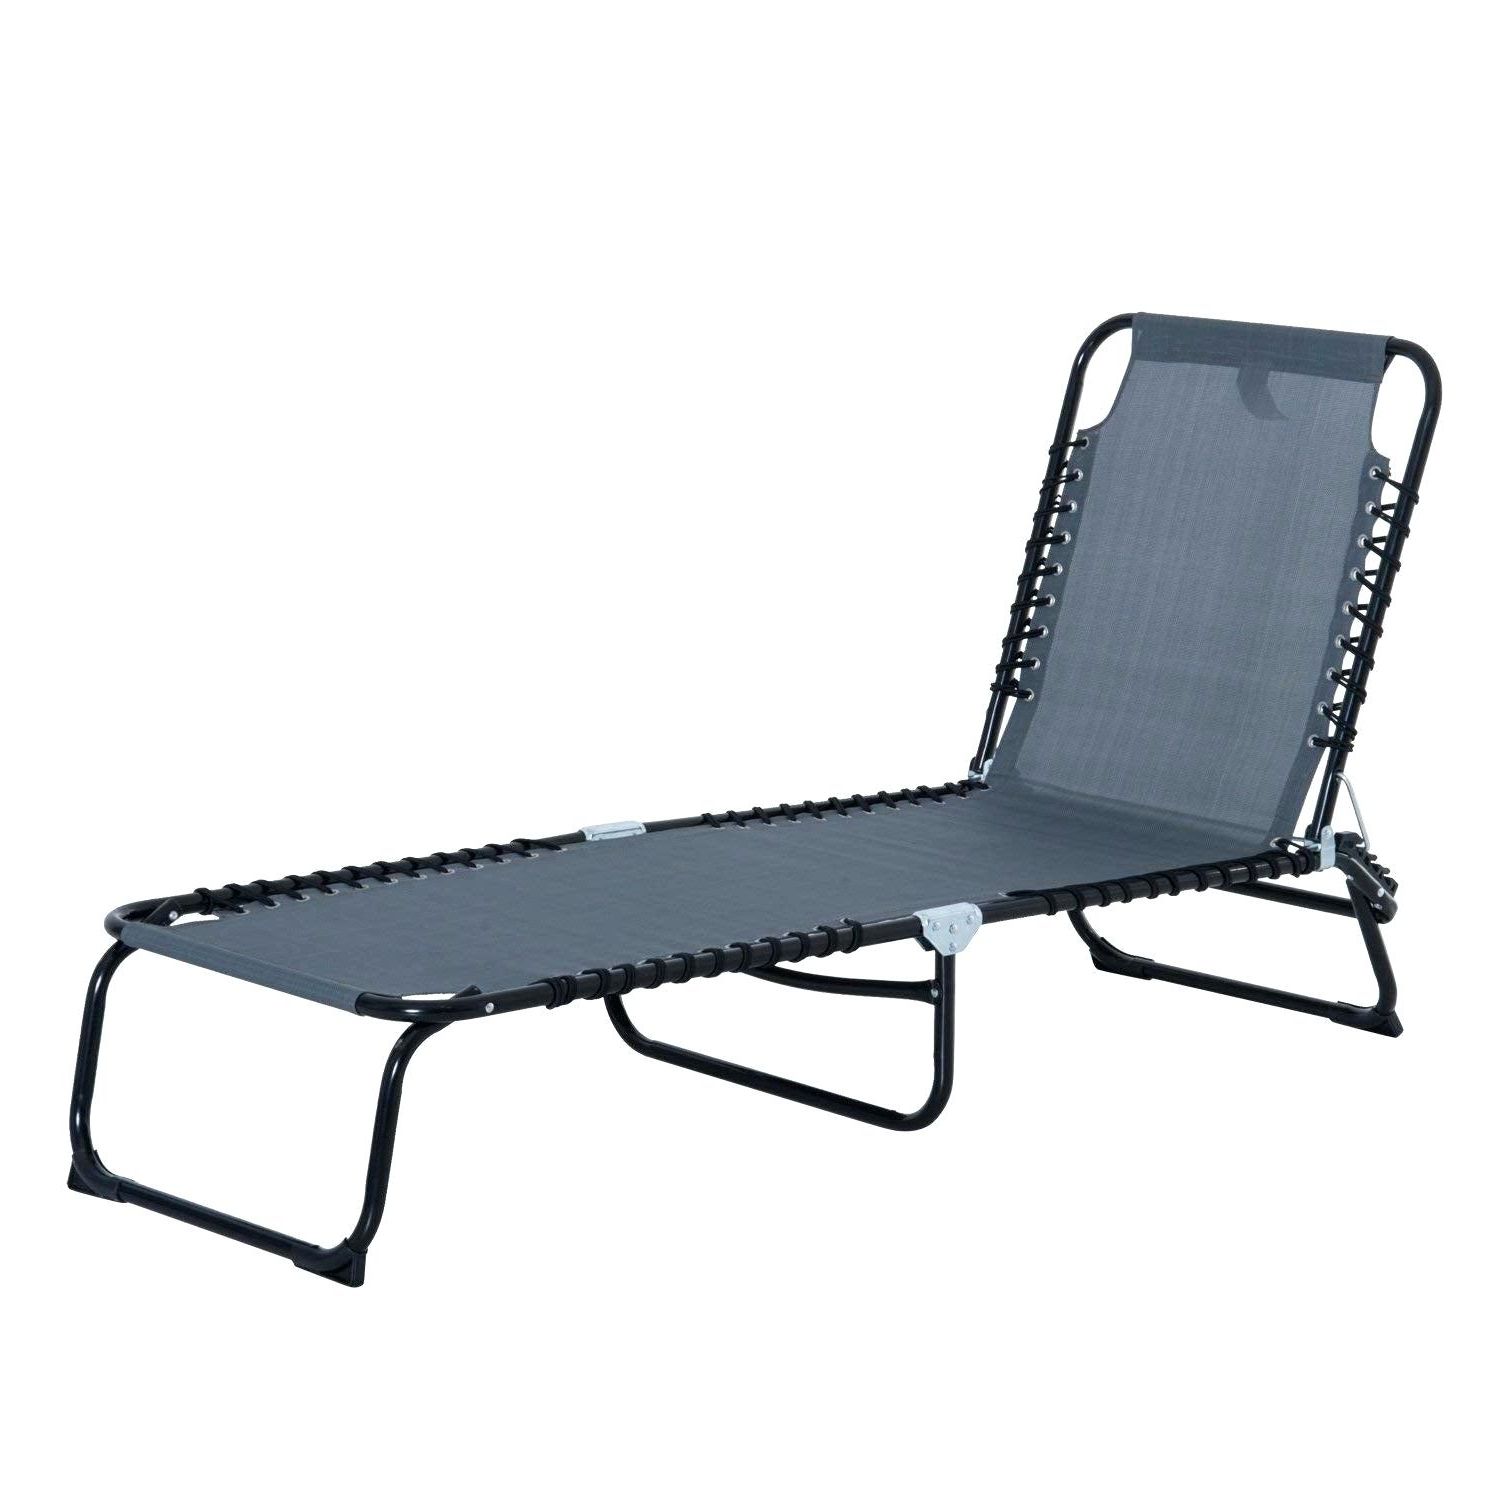 Favorite Metal Chaise Lounge Metal Chaise Lounge Patio Chairs Metal For Shore Aluminum Outdoor Chaises (View 25 of 25)